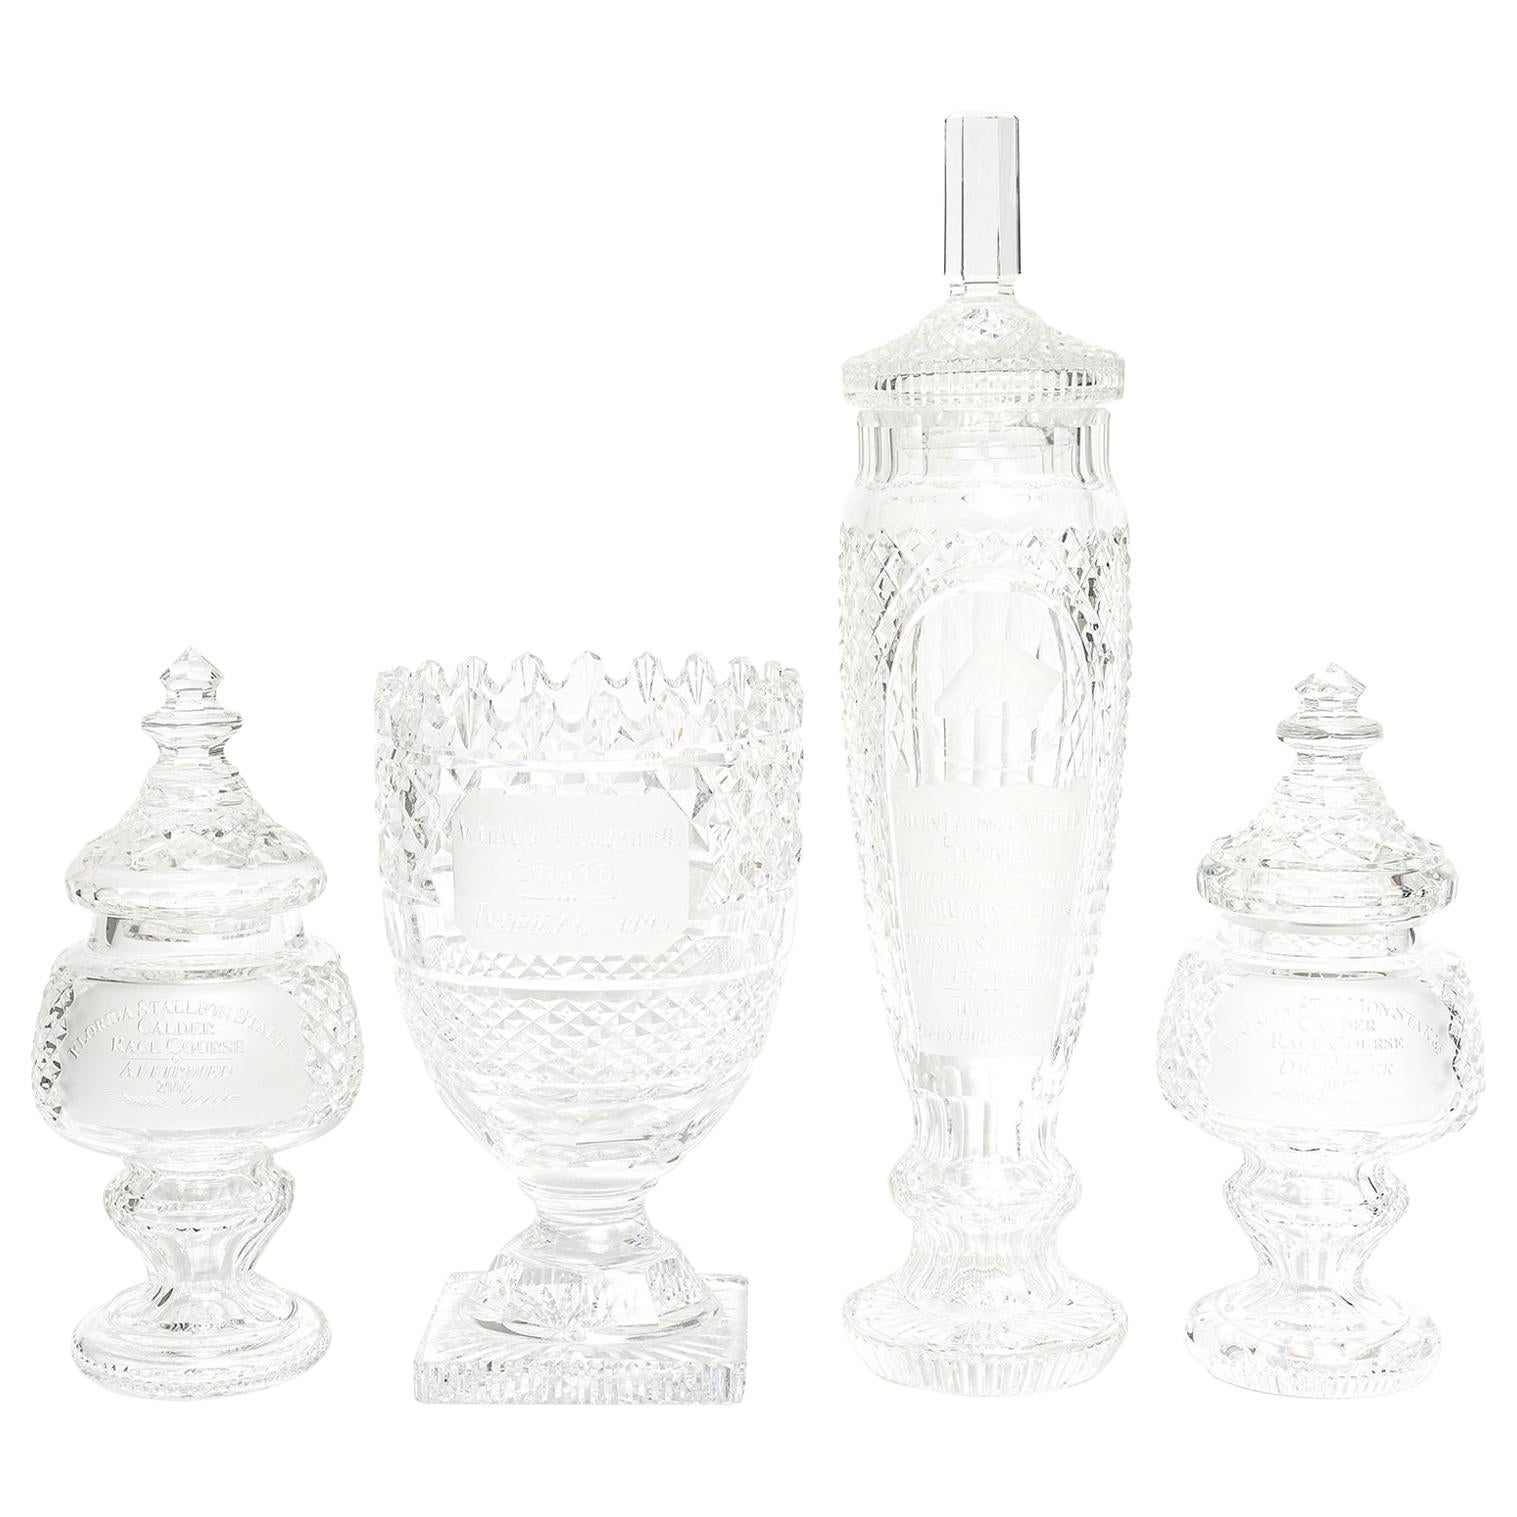 Waterford Cut Crystal Horse Racing Vase and Jar Trophy Awards Group of 4